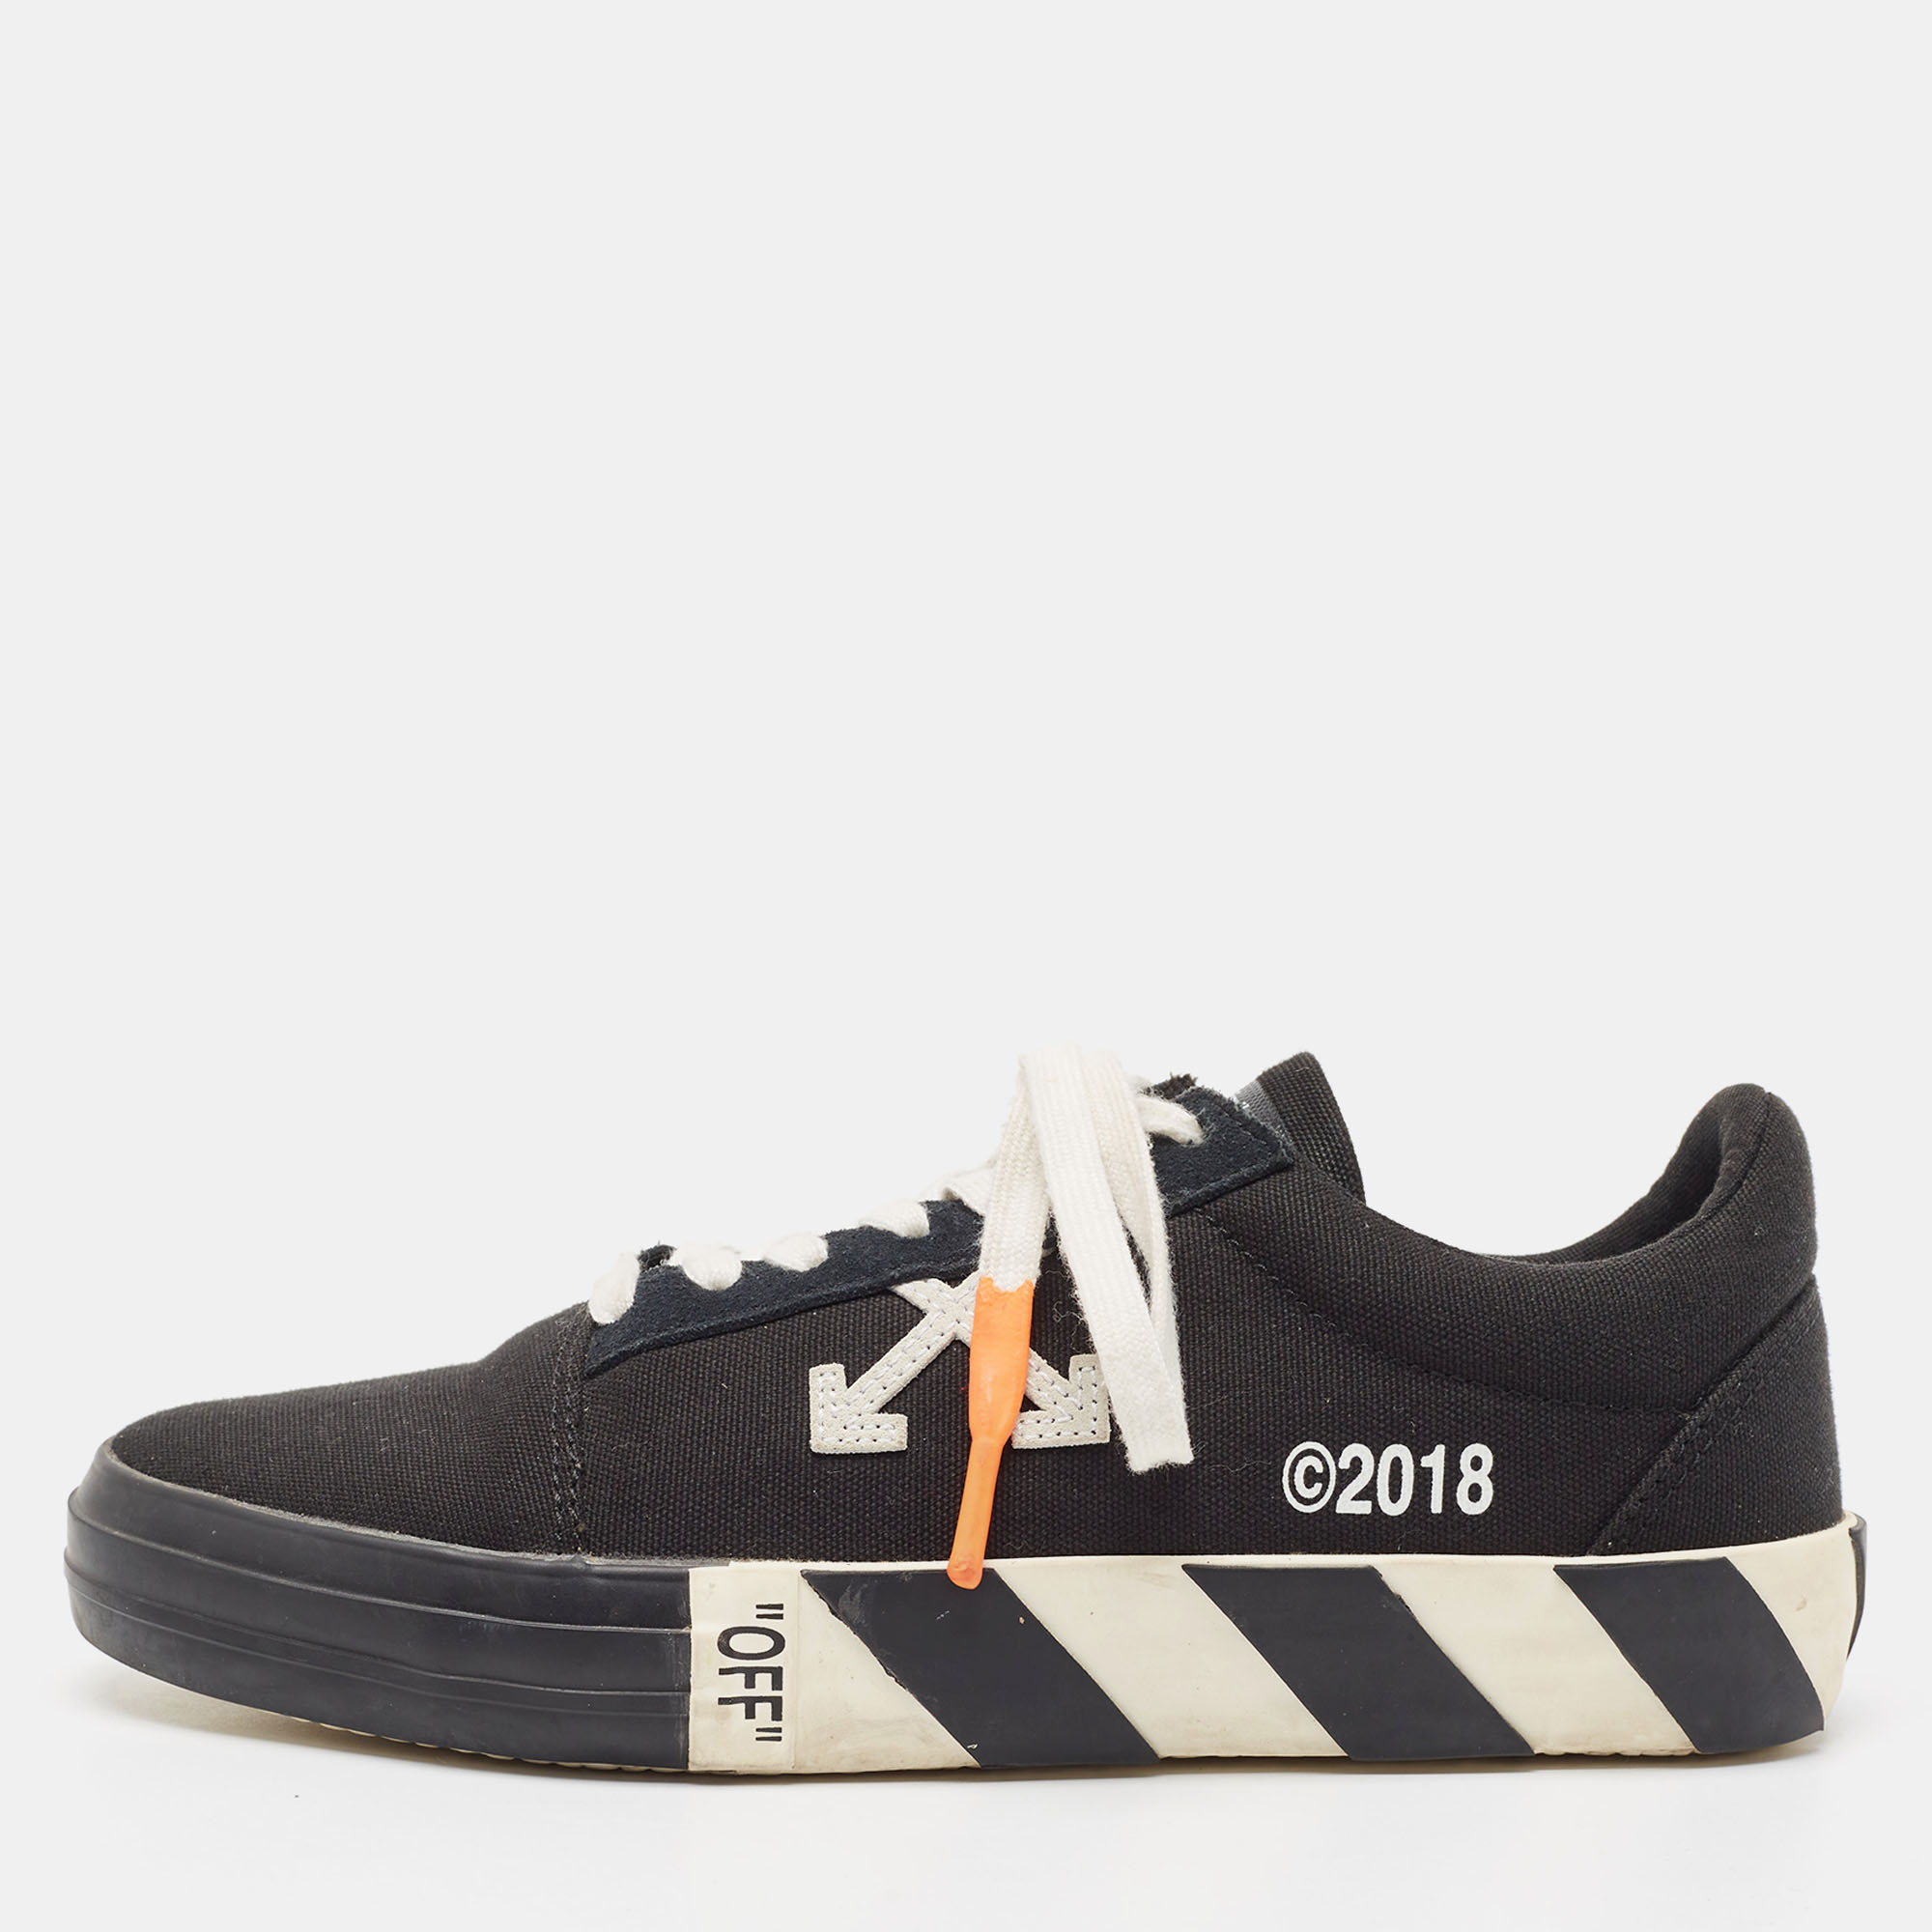 Coming in a classic silhouette these Off White sneakers are a seamless combination of luxury comfort and style. These sneakers are designed with signature details and comfortable insoles.